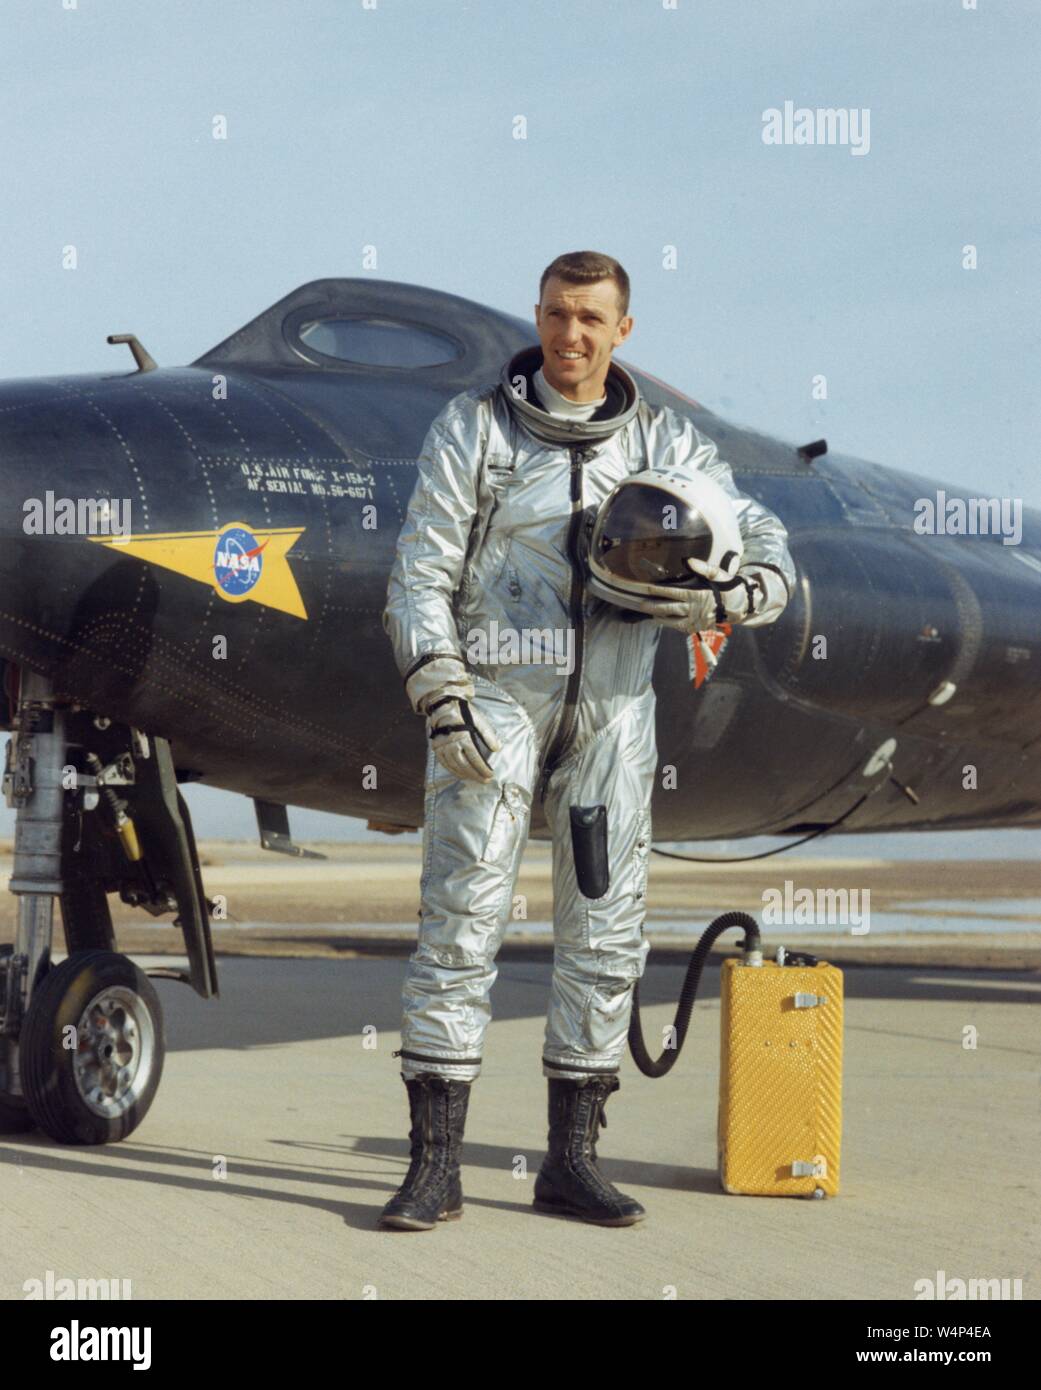 Astronaut Joe Henry Engle poses in front of the X-15 Research Rocket aircraft, December 2, 1965. Image courtesy National Aeronautics and Space Administration (NASA). () Stock Photo